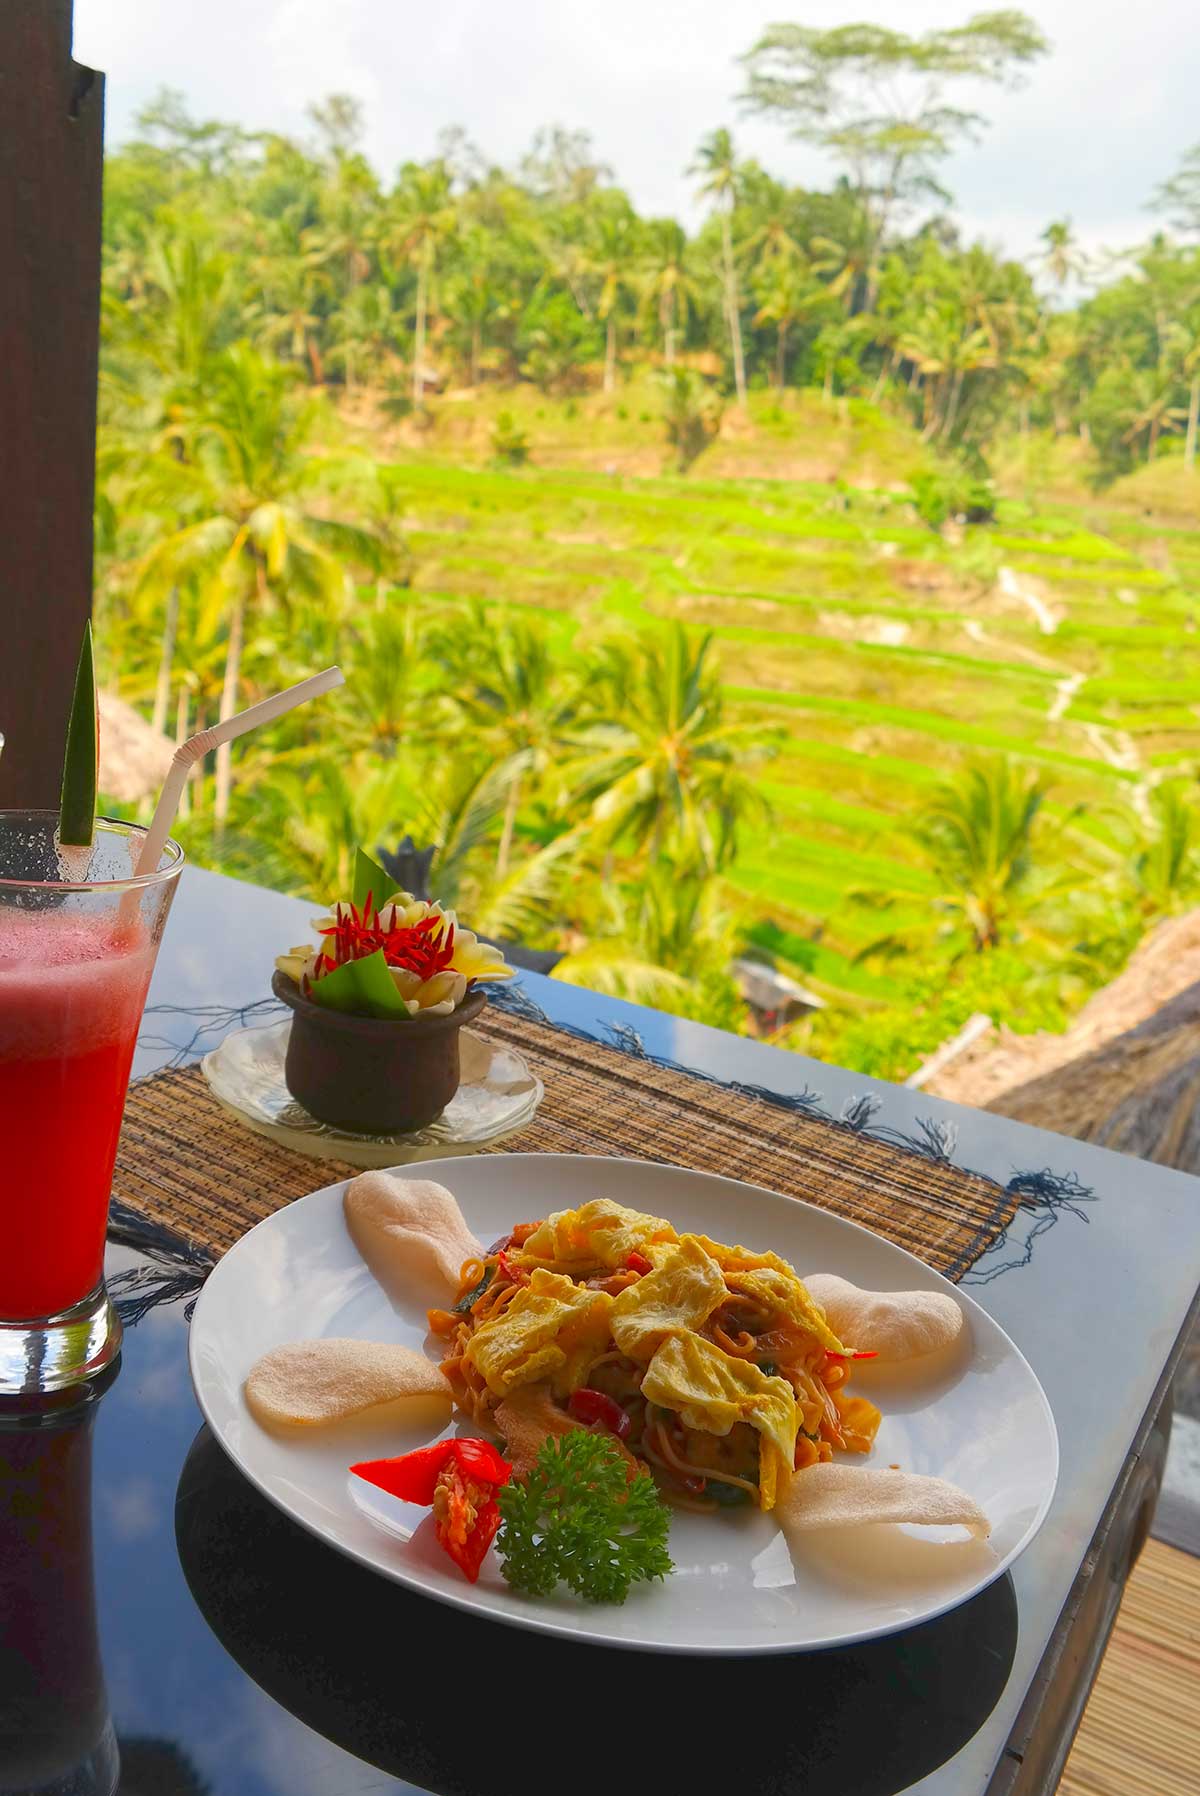 Let Bali Feed Your Belly (Our Favorite Culinary Experiences Listed